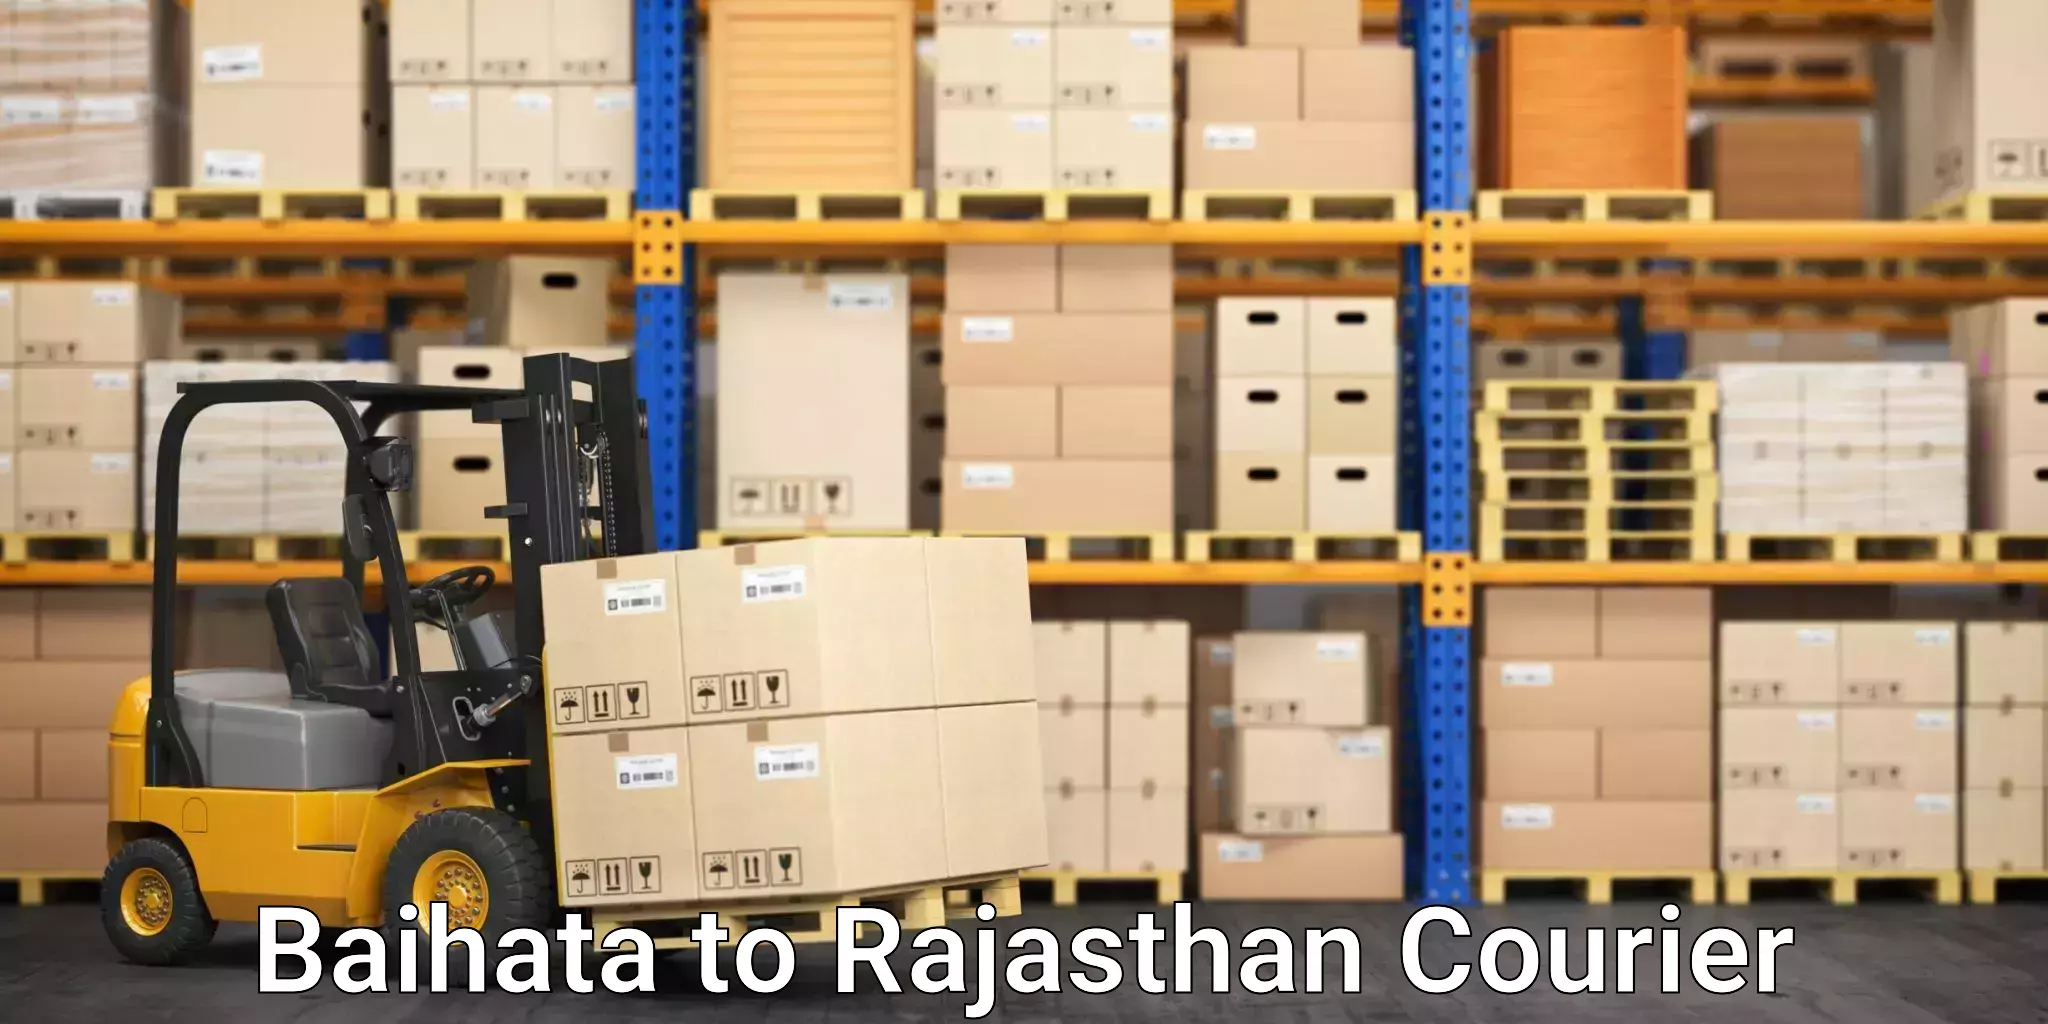 Courier service comparison in Baihata to Rajasthan